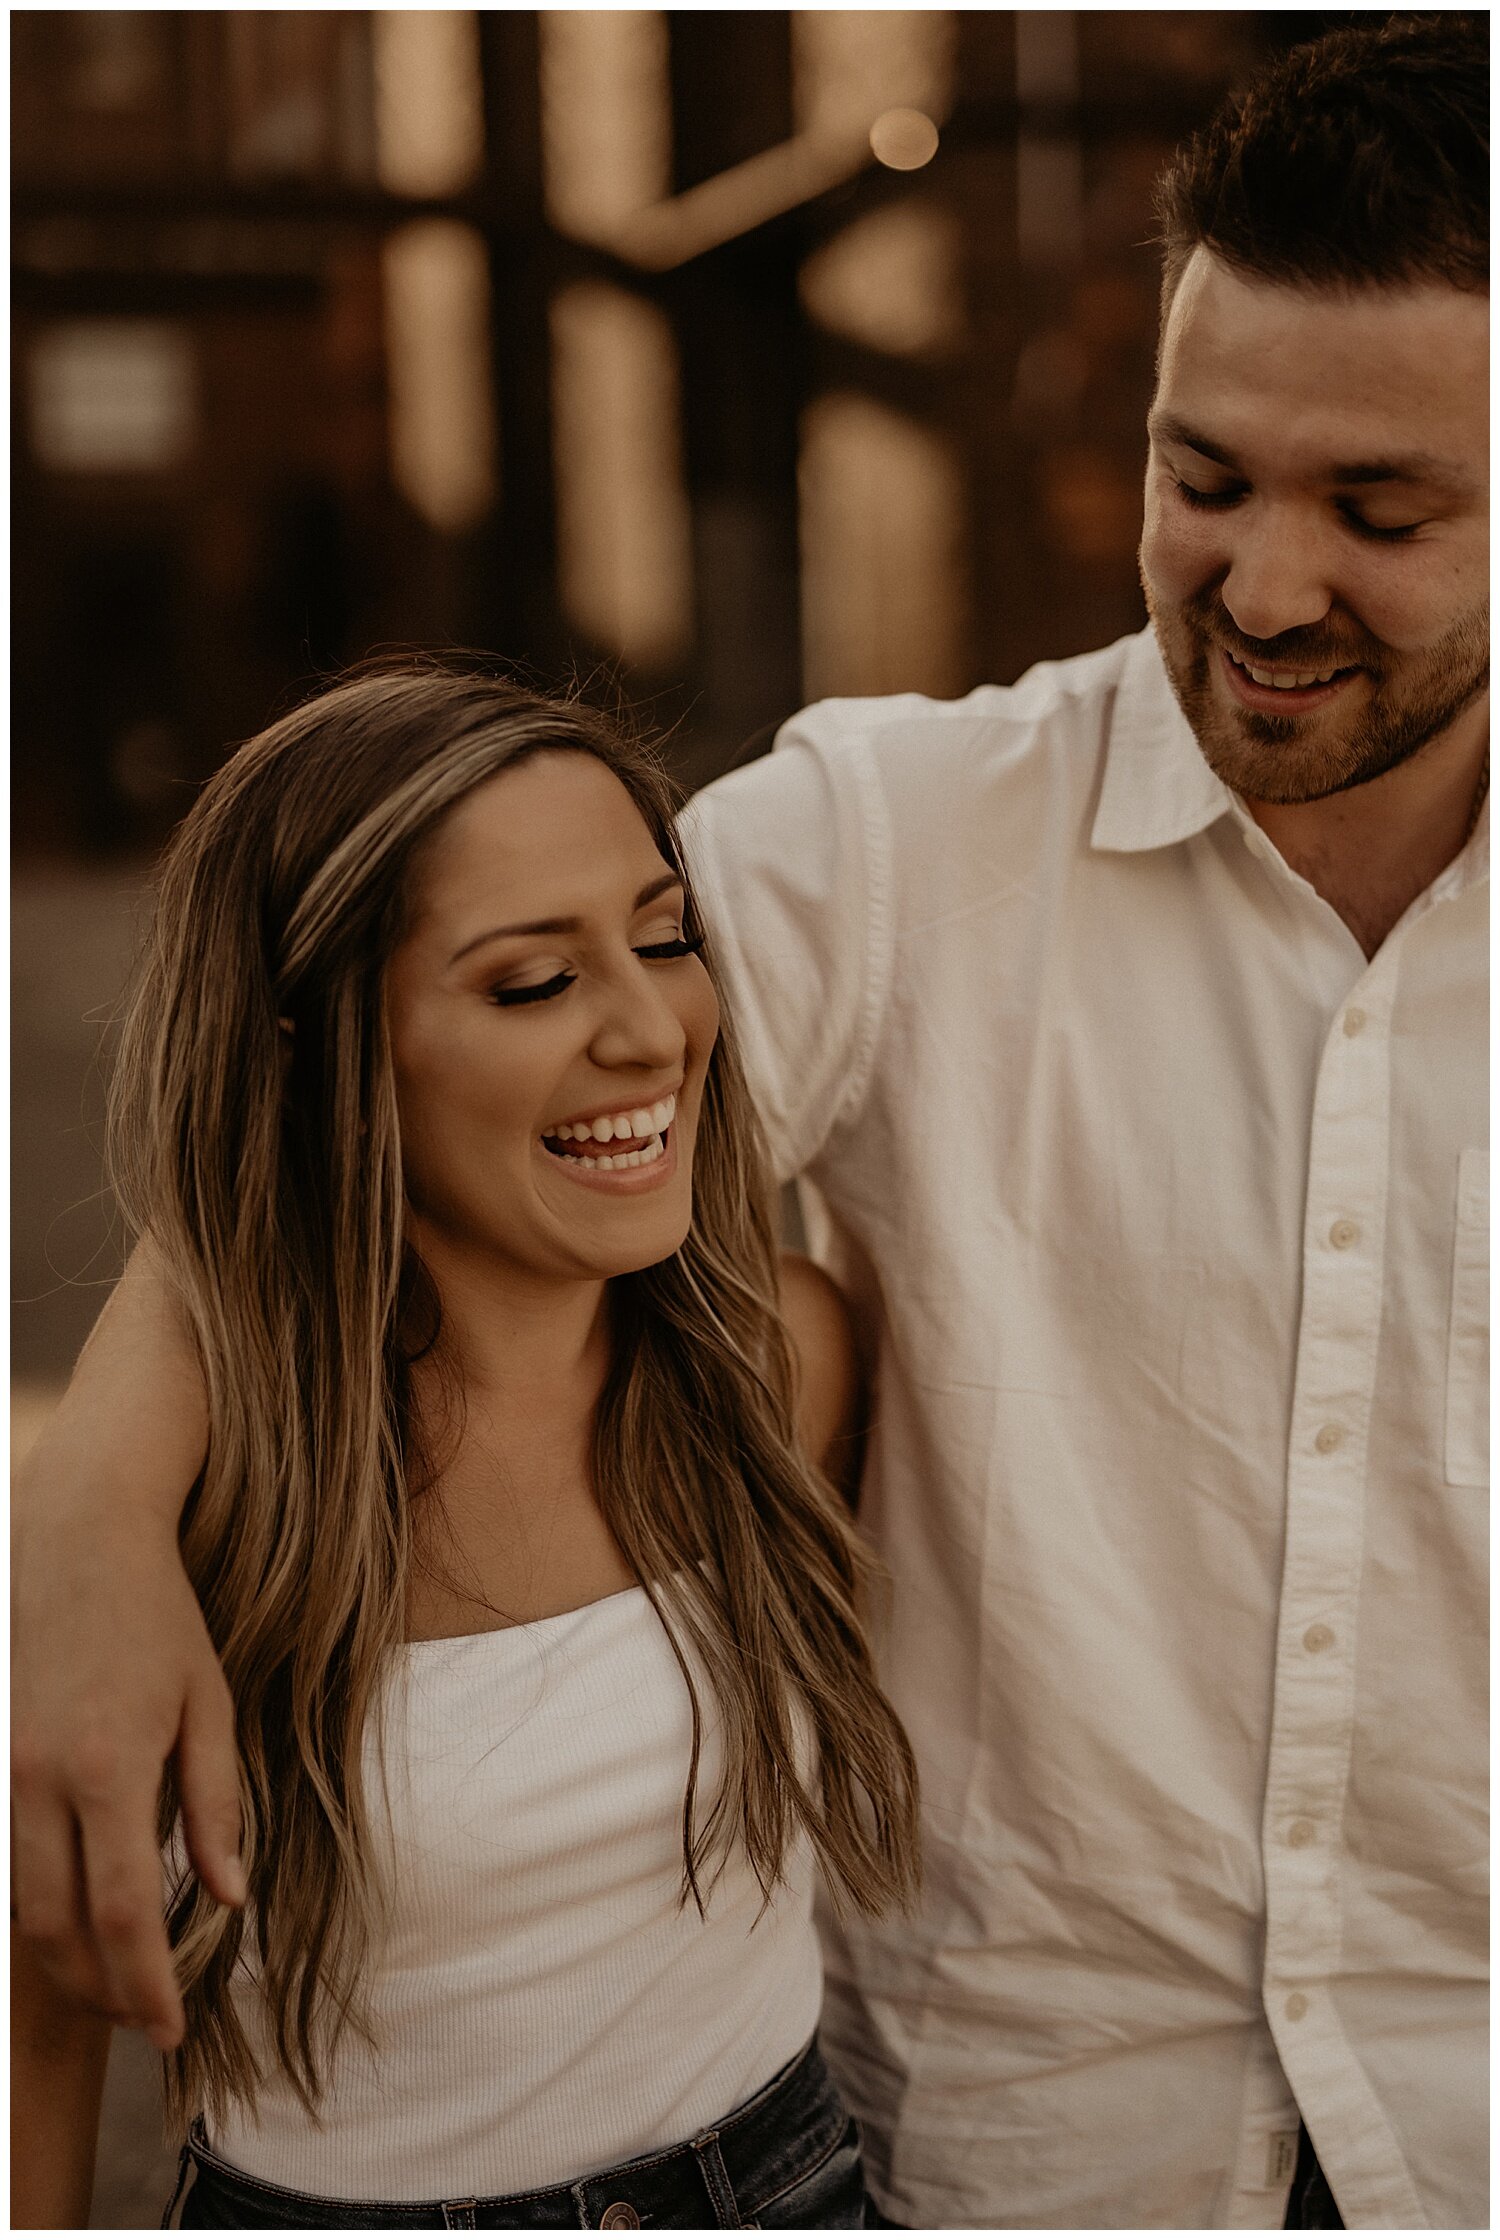 Cotton_Factory_And_Waterfall_Engagement_Session_Hamilton_Ontario_Wedding_Photographer_0007.jpg